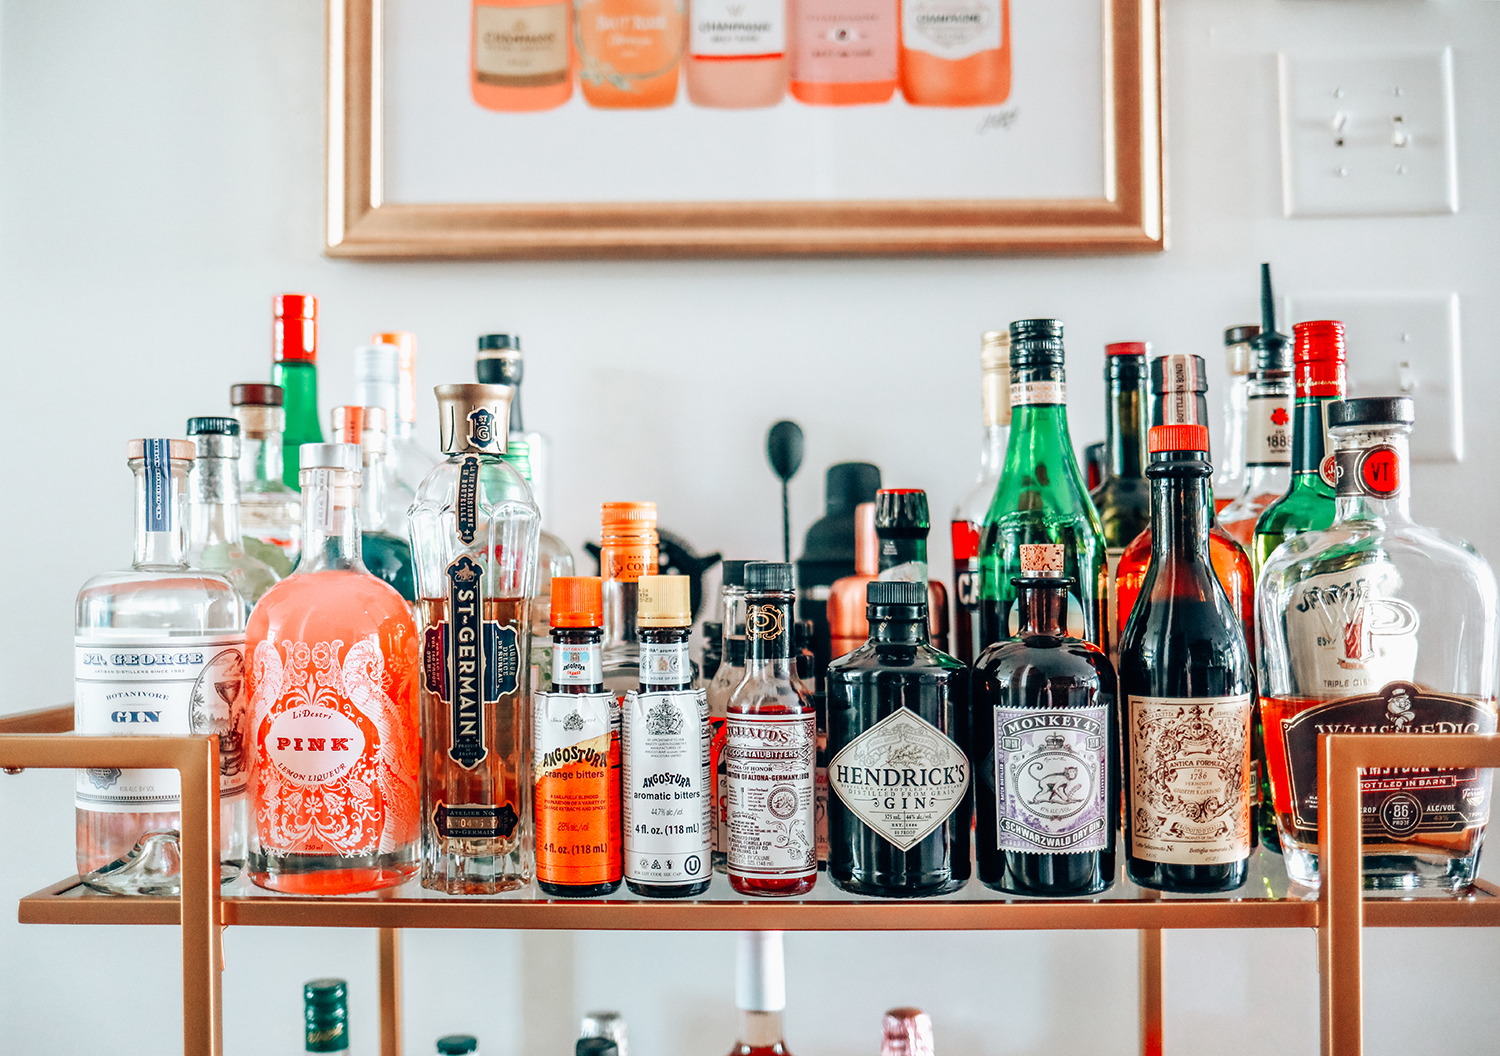 How to Stock Your Home Bar